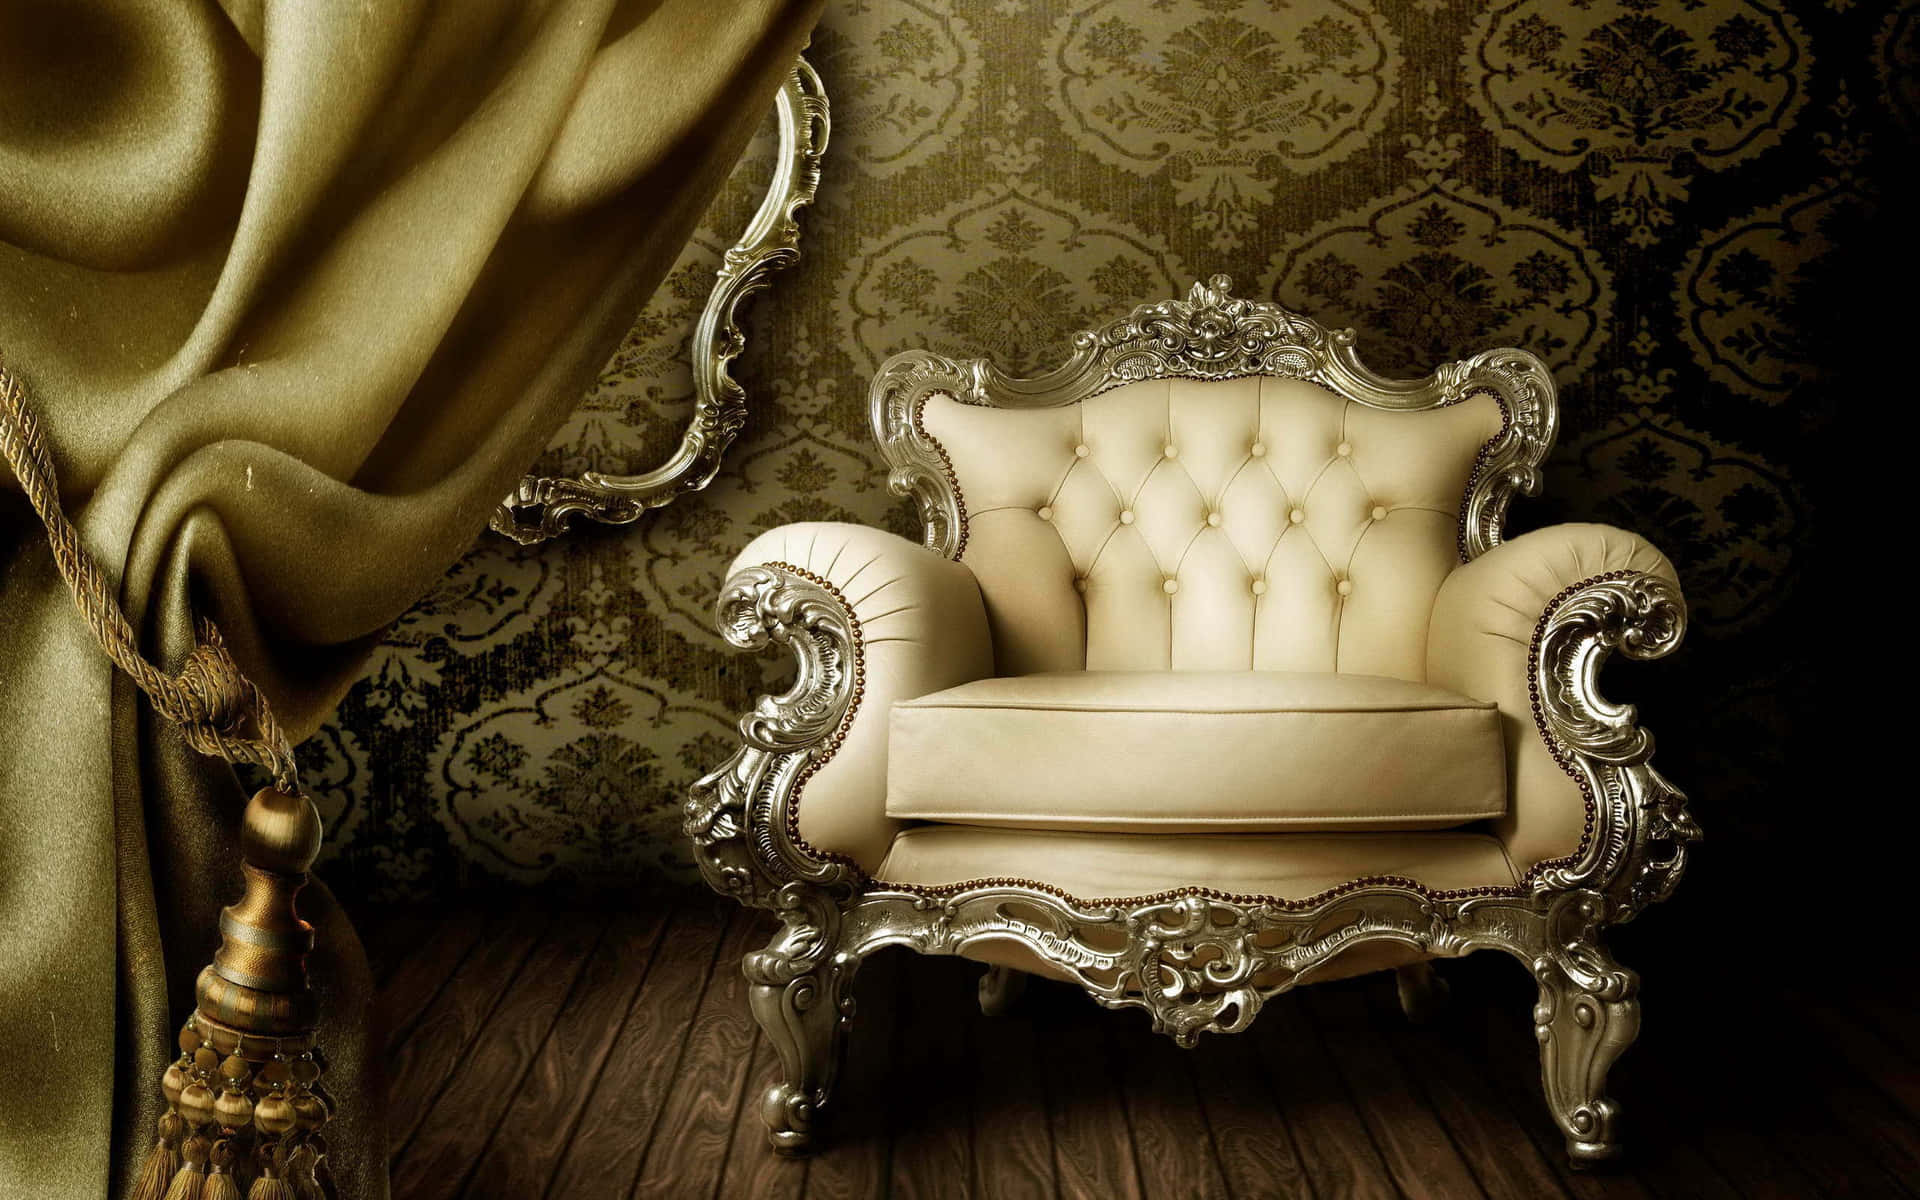 White Royalty Single Couch Wallpaper